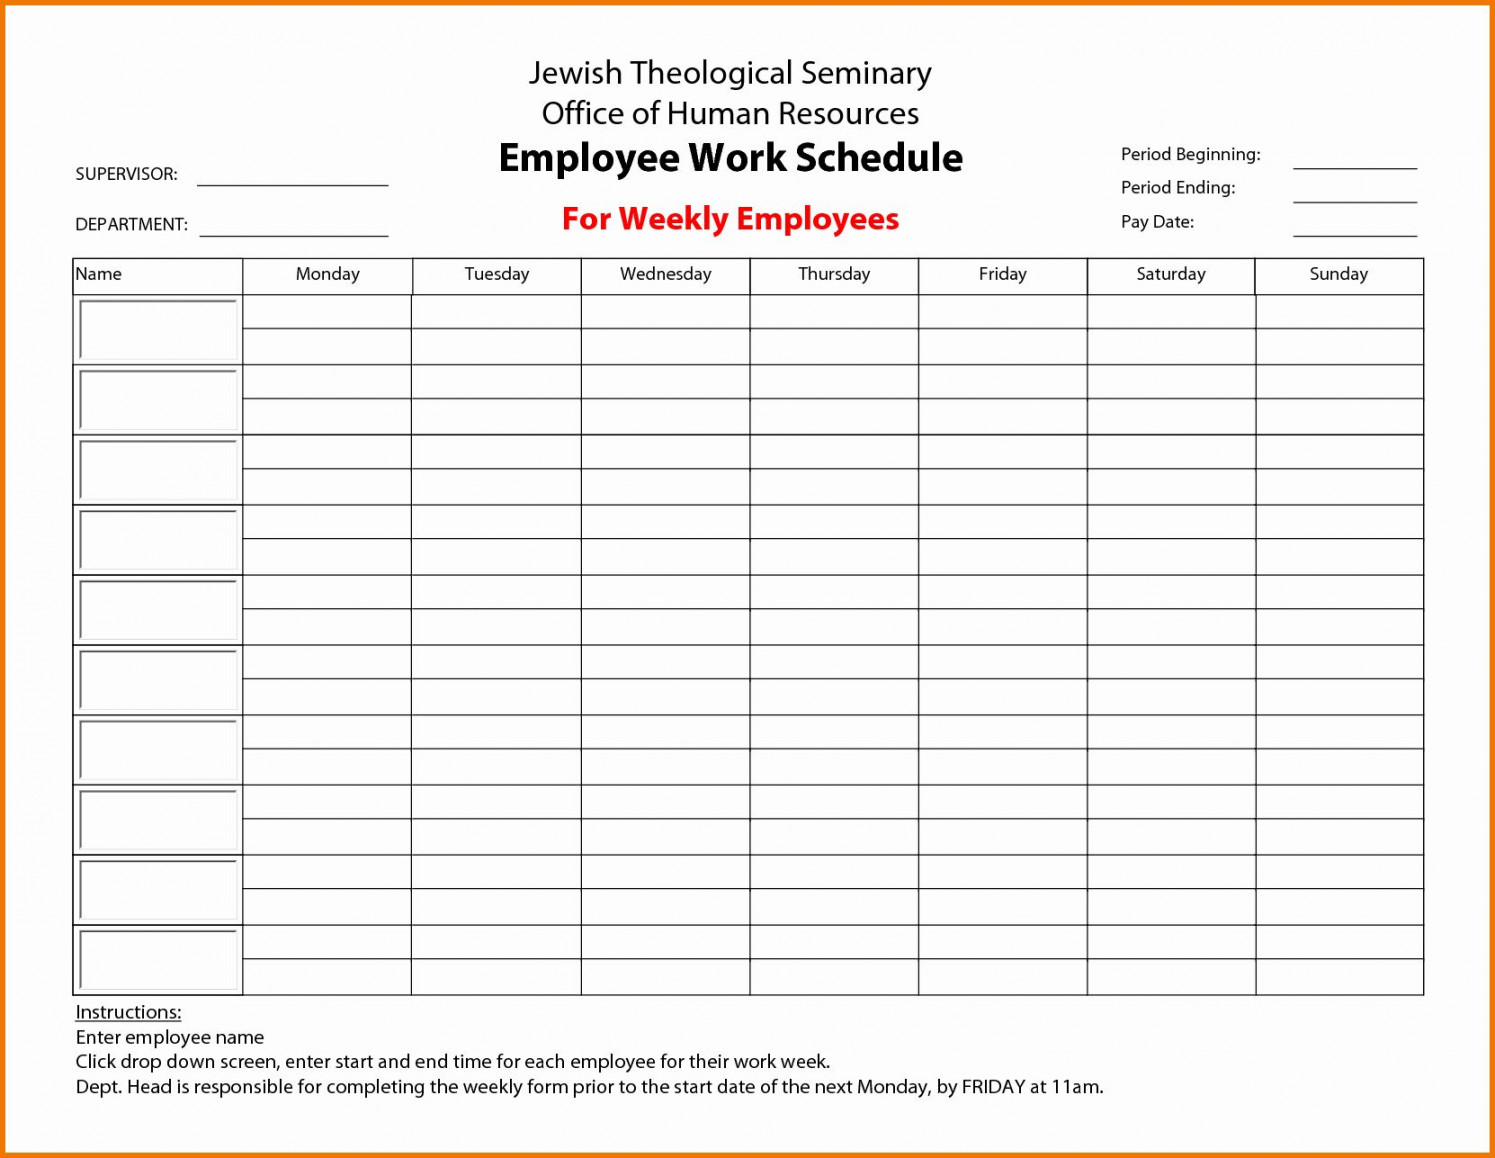 Employee Schedule Template Free Lovely Search Results for “a